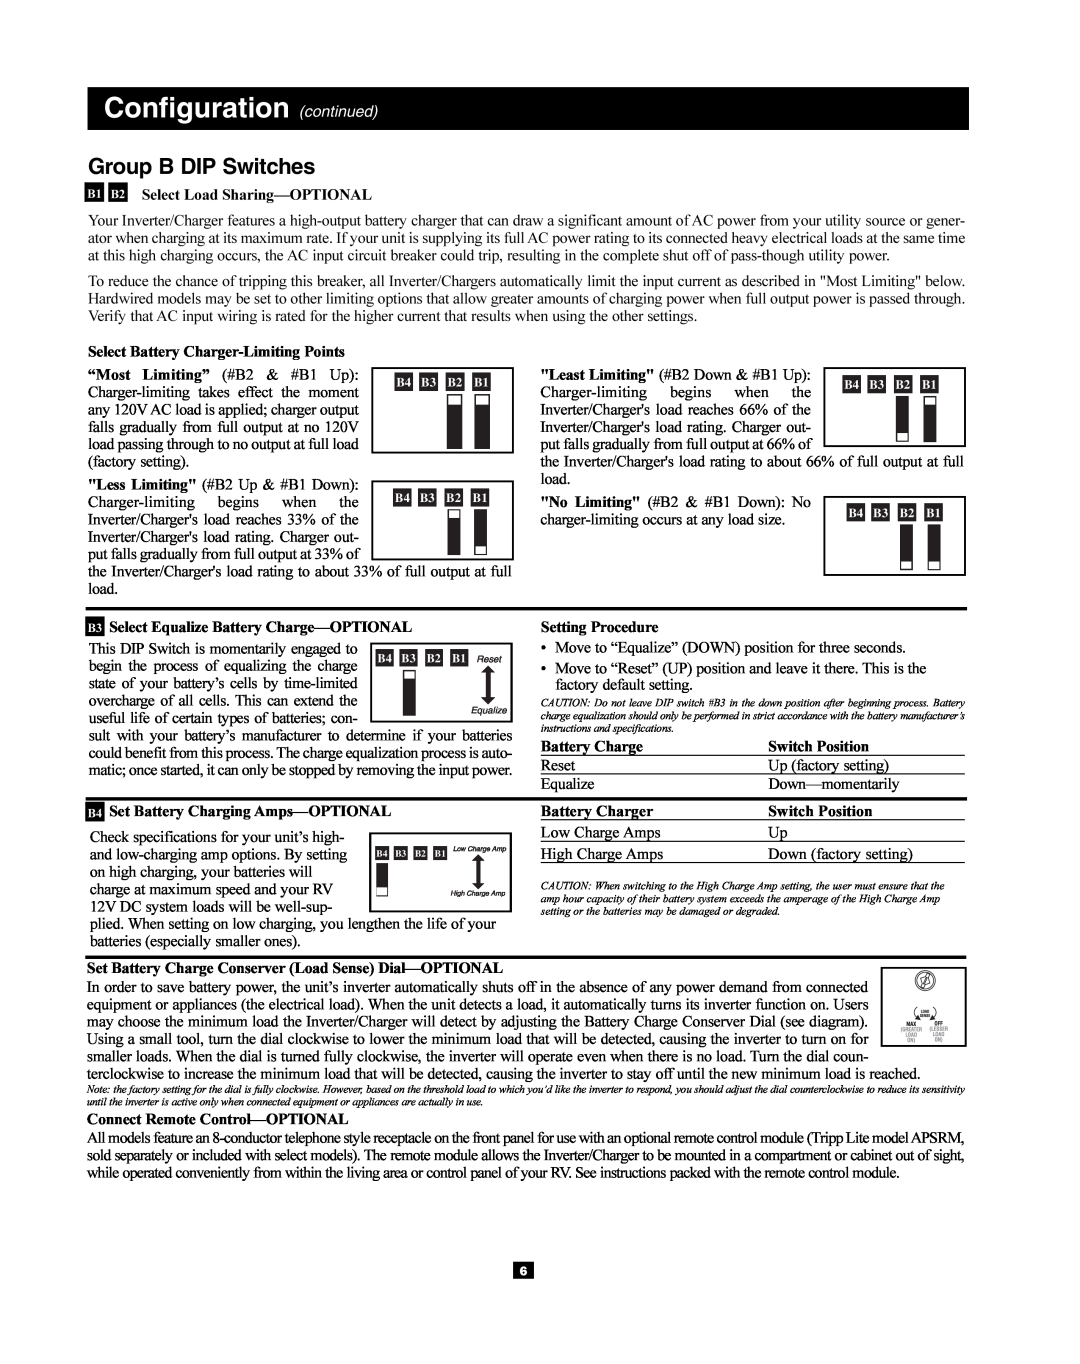 Tripp Lite 93-2768, 200712159 owner manual Configuration continued, Group B DIP Switches 